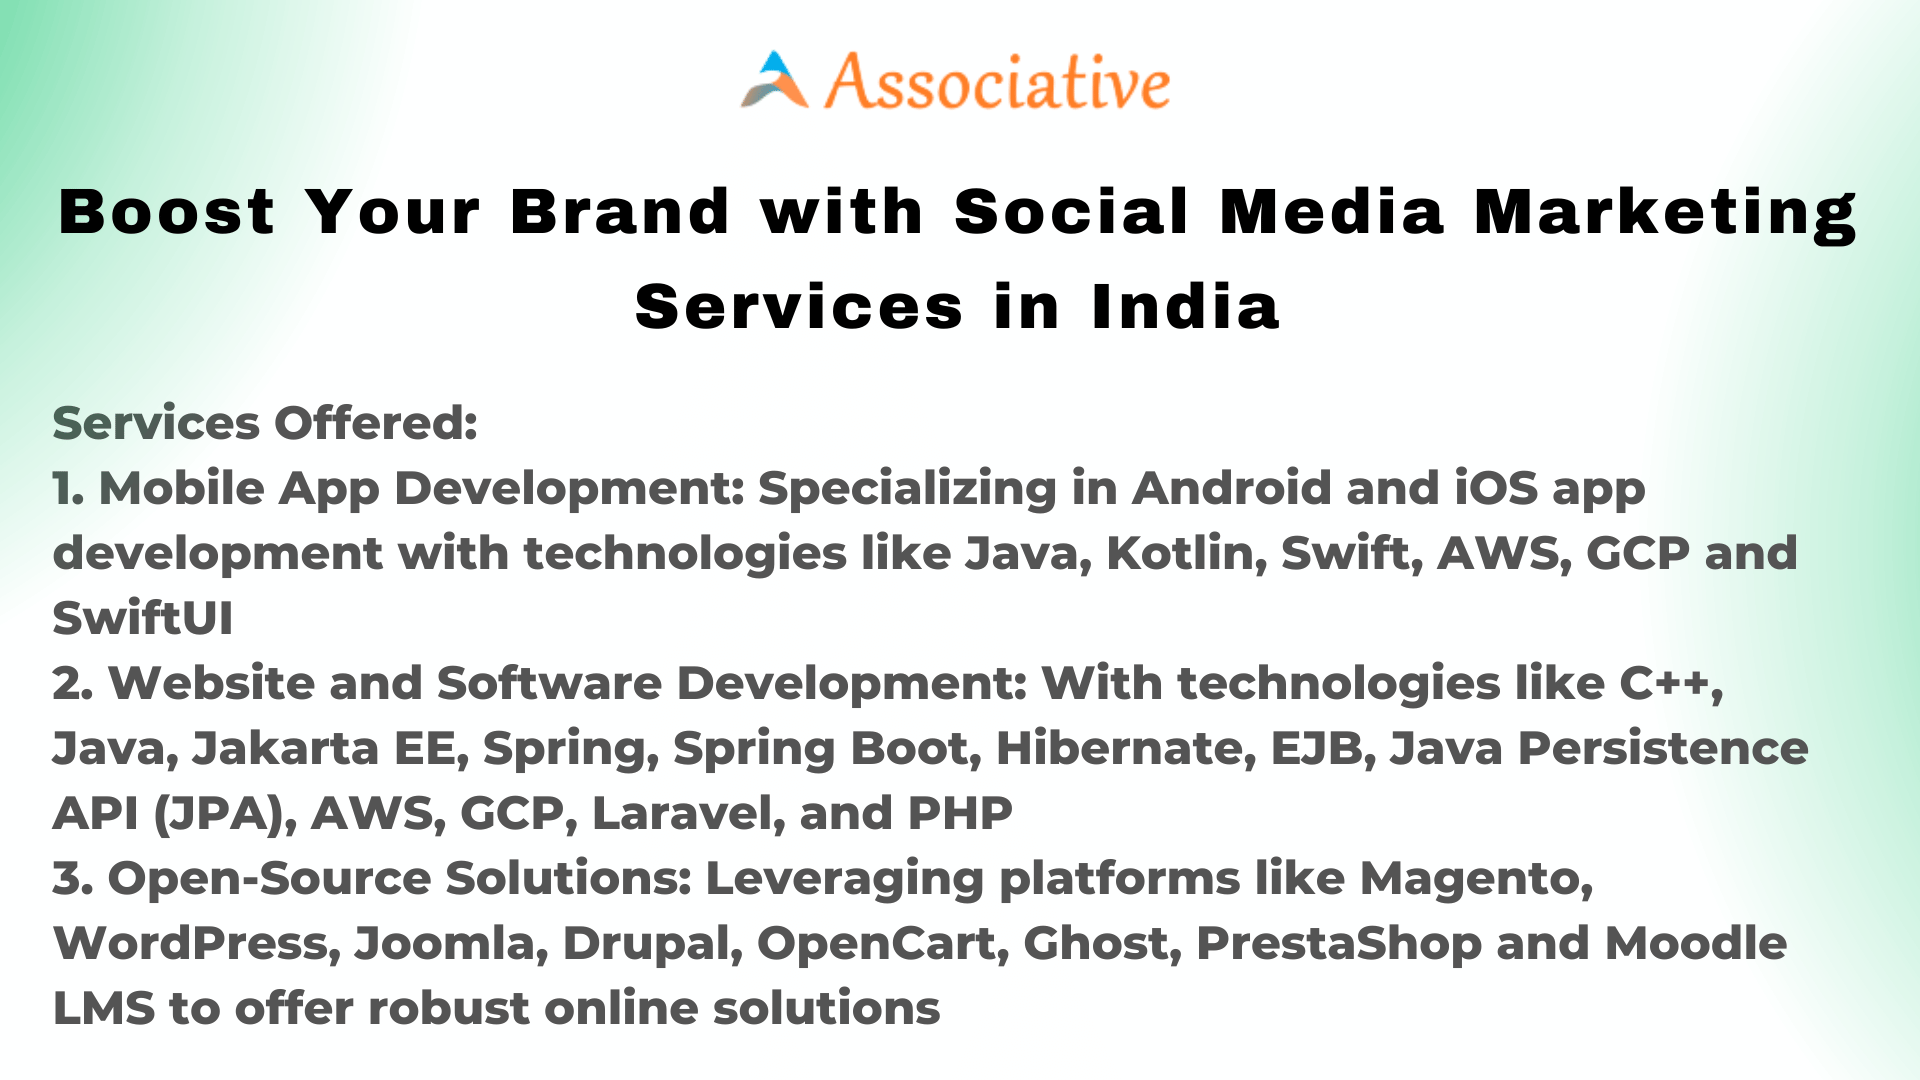 Boost Your Brand with Social Media Marketing Services in India